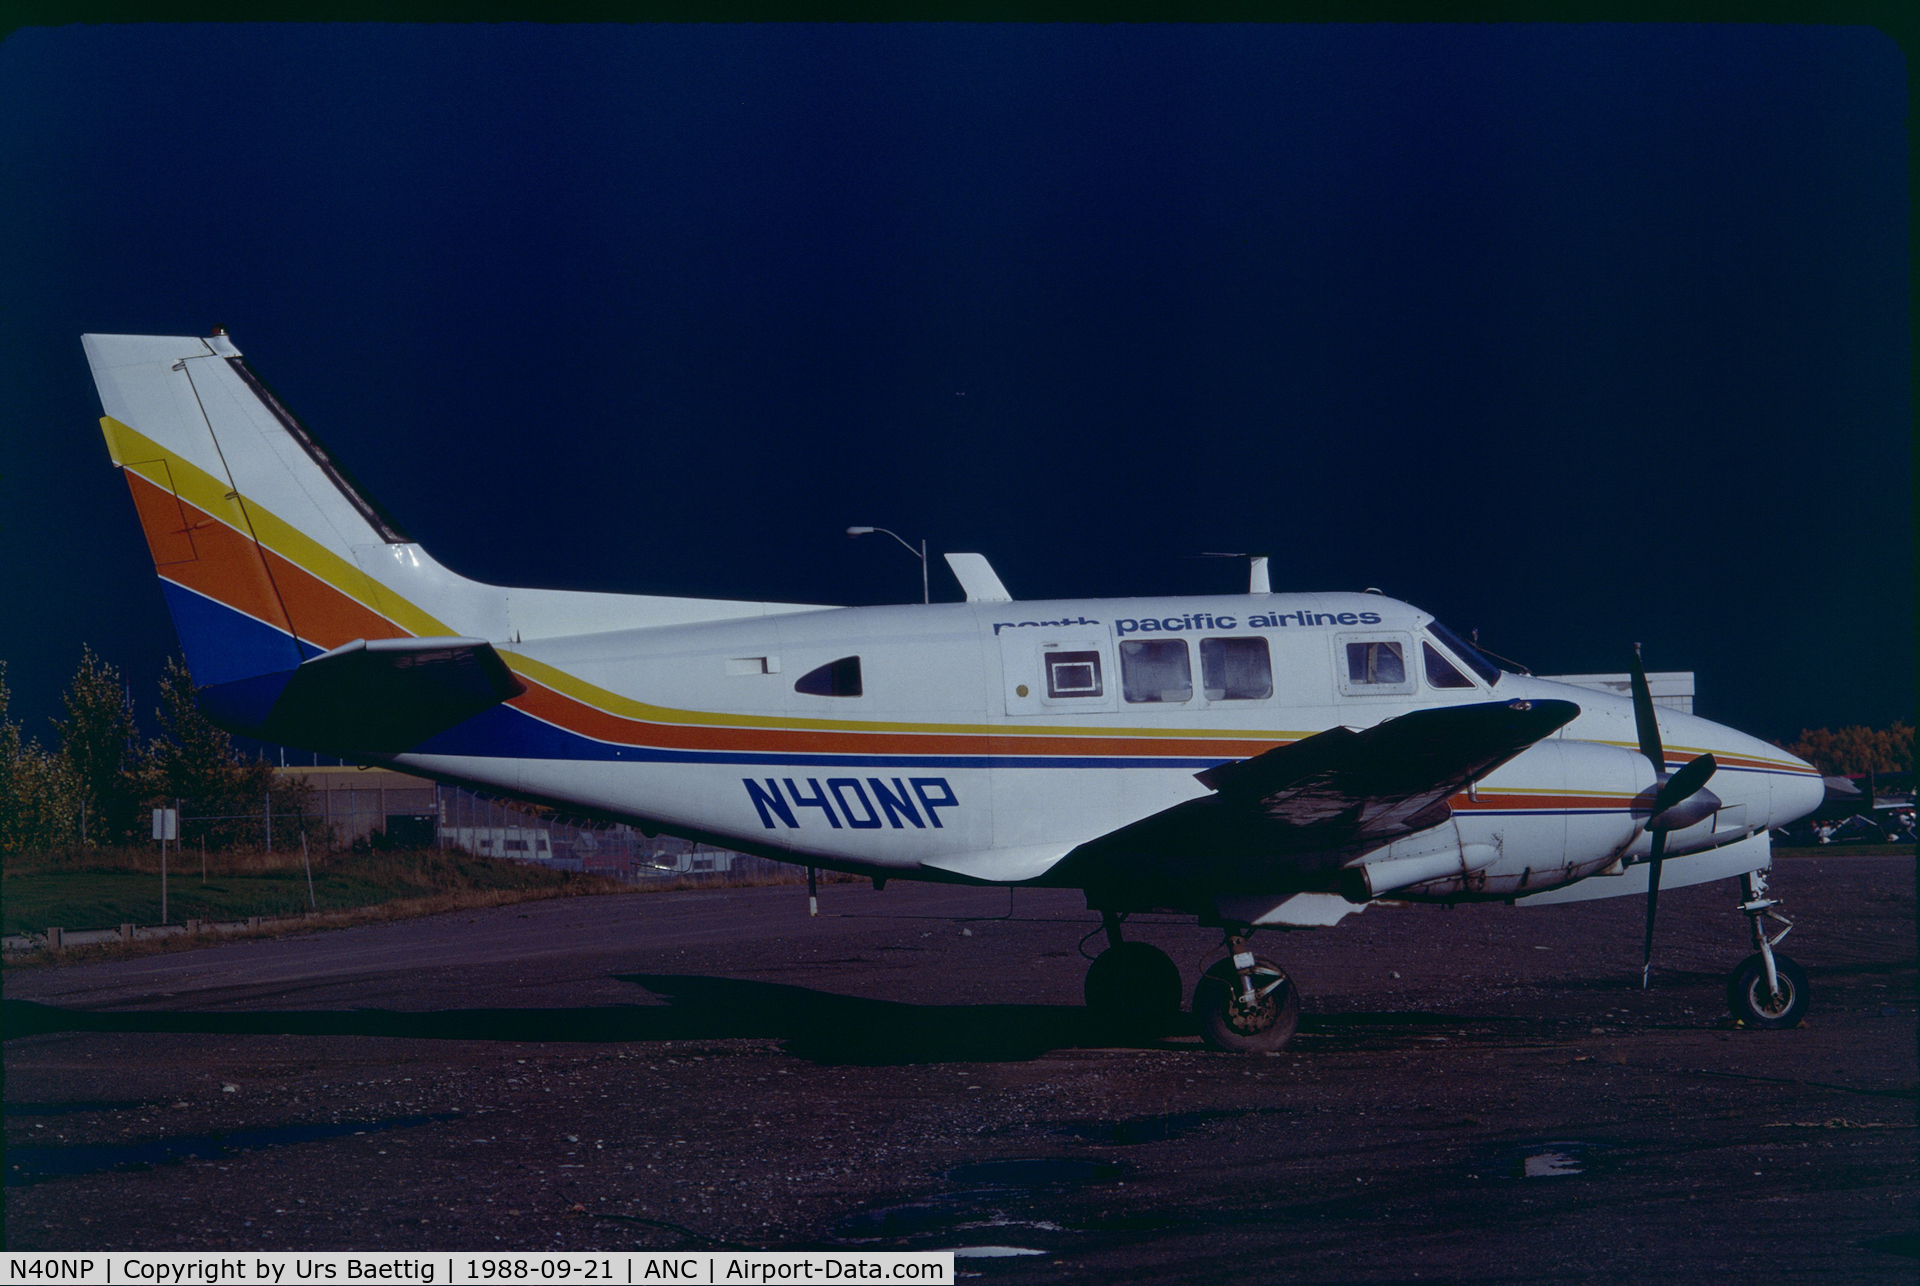 N40NP, 1964 Beech 65-A80 C/N LD-209, North Pacific Airlines at ANC